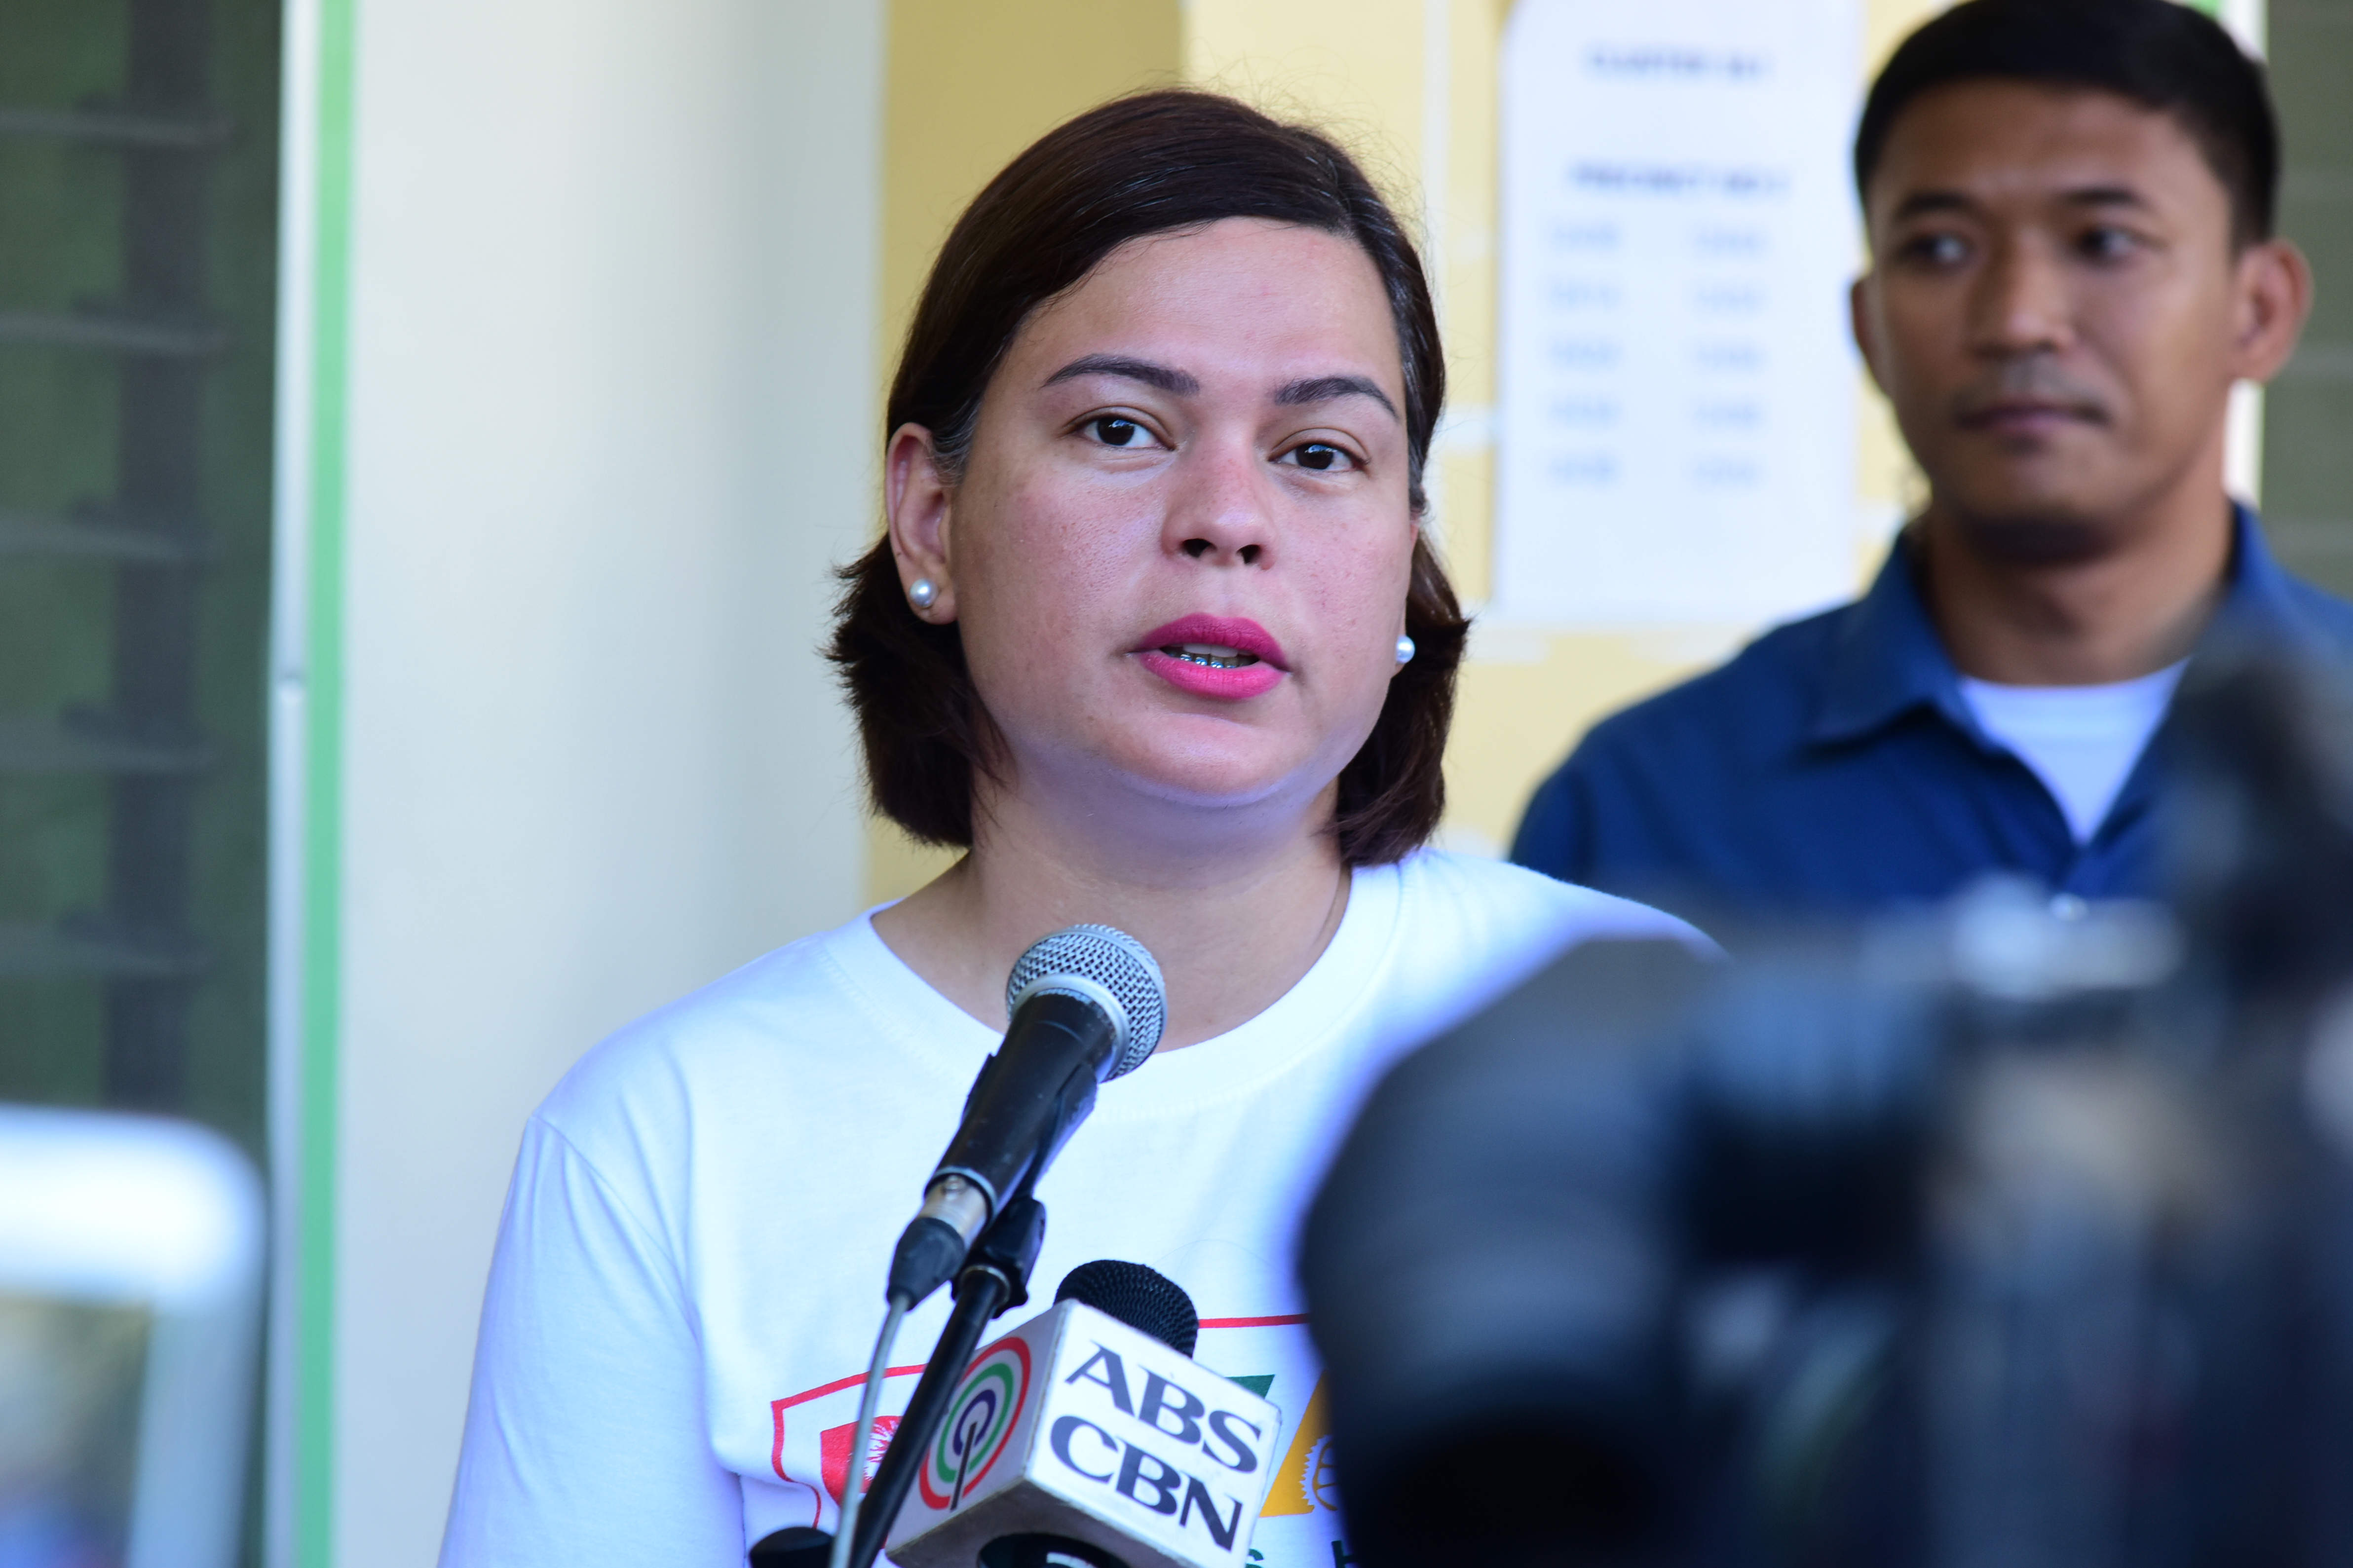 Sara on Duterte's prolonged absence: I have no news of his sickness or death